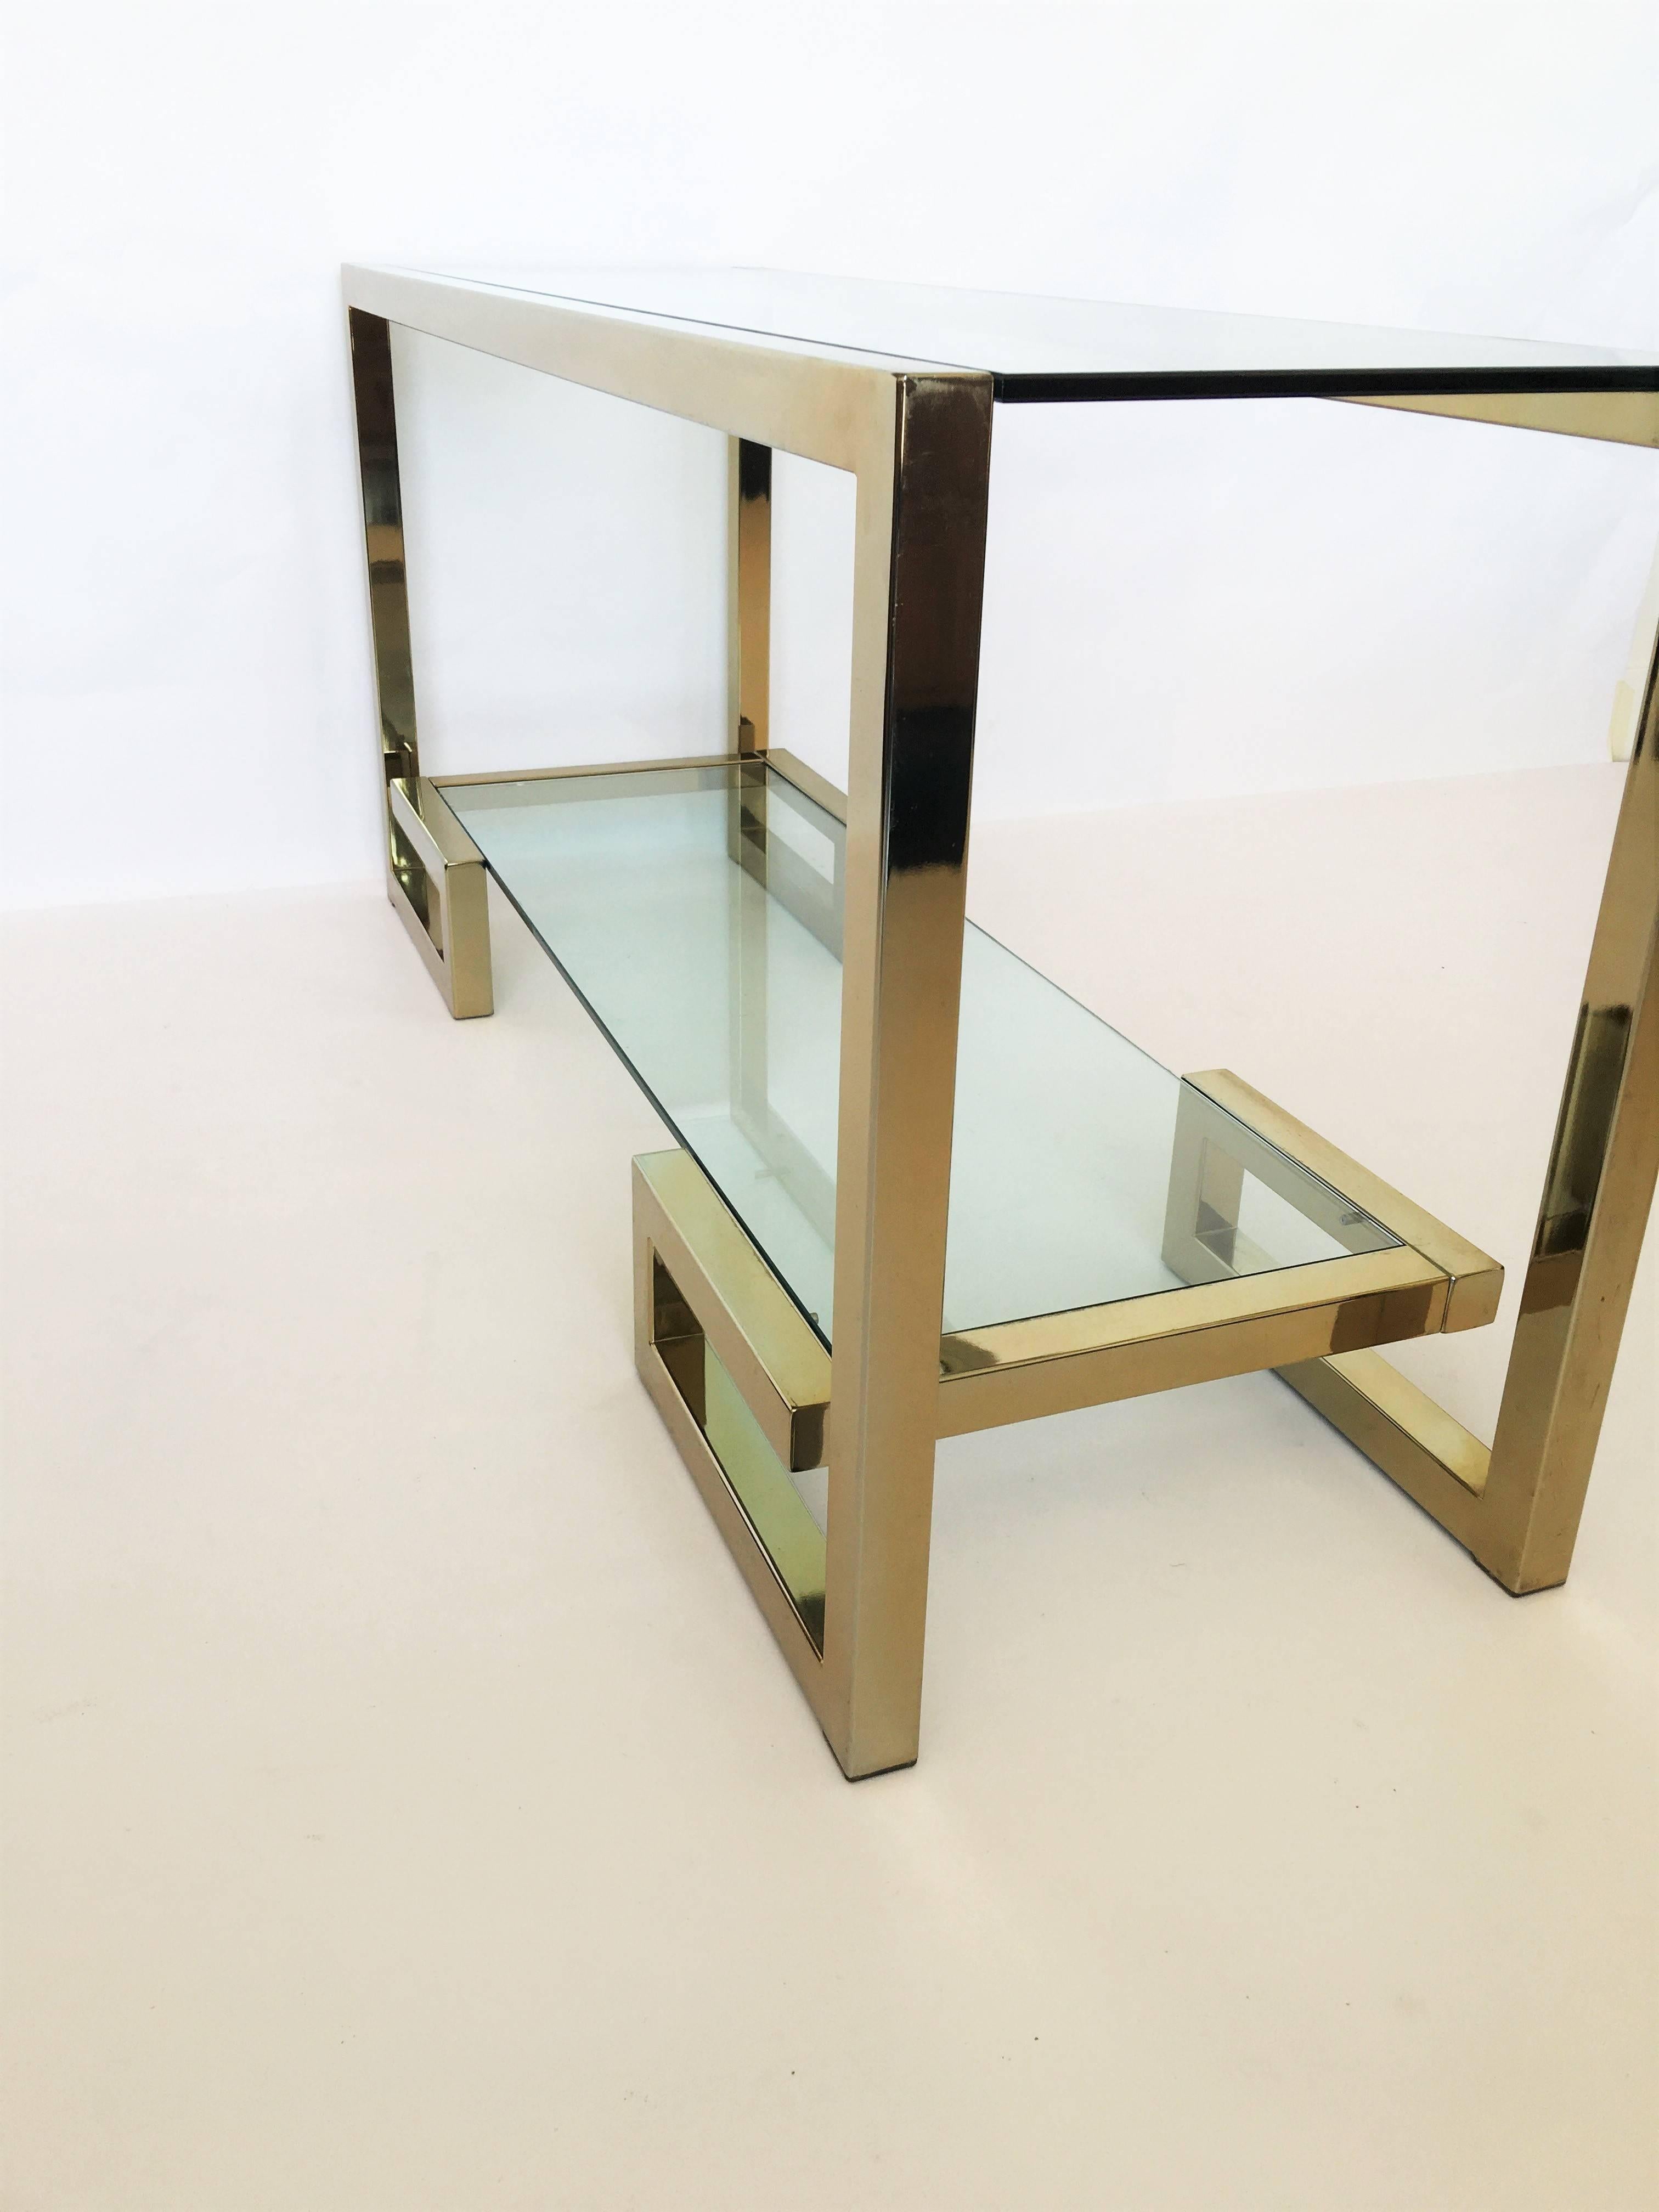 American Brass Milo Baughman Style Console with Two Shelves, 1970s For Sale